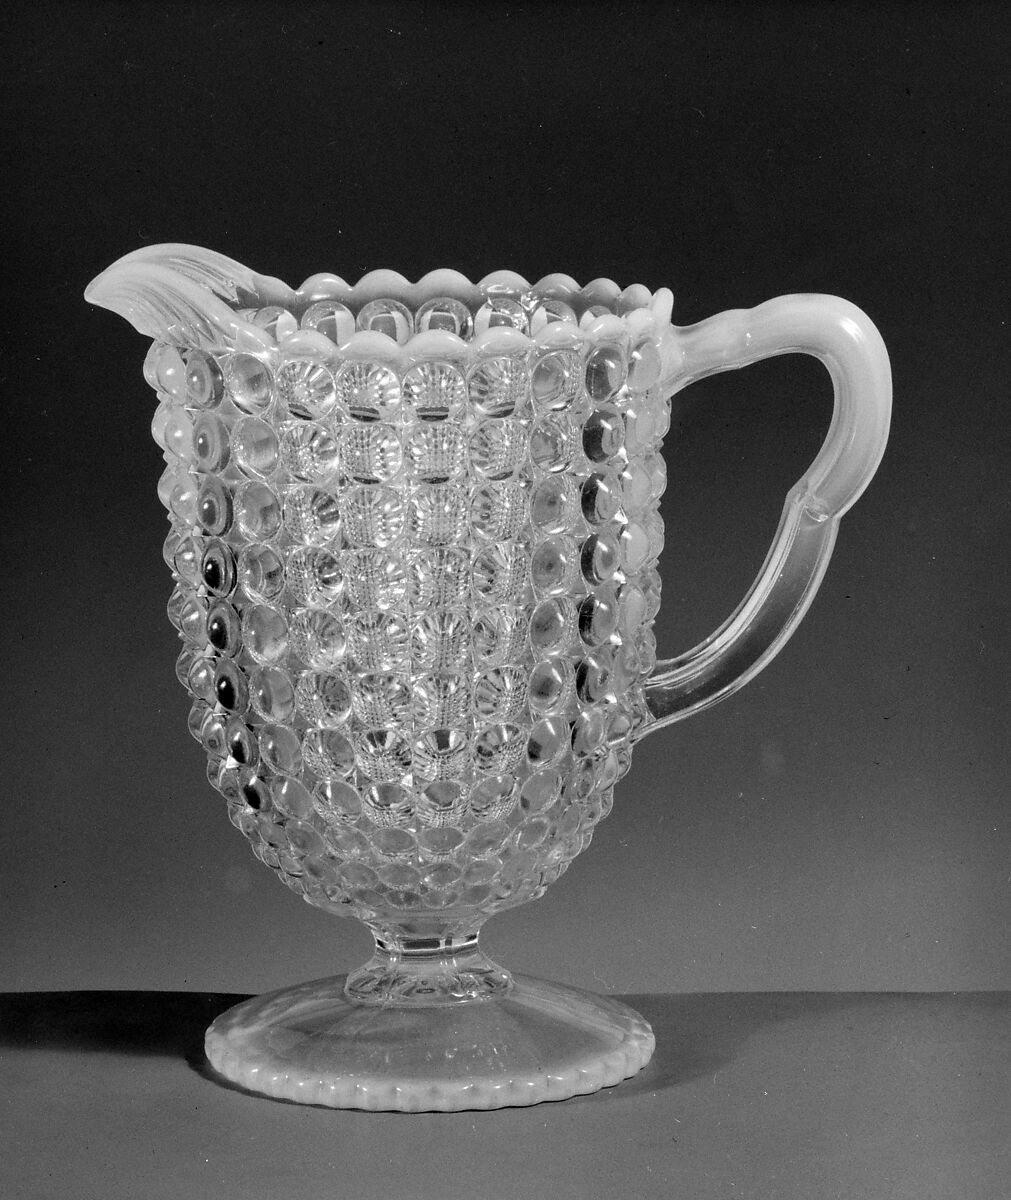 Milk Pitcher, Richards and Hartley Flint Glass Co. (ca. 1870–1890), Pressed colorless and opalescent glass, American 